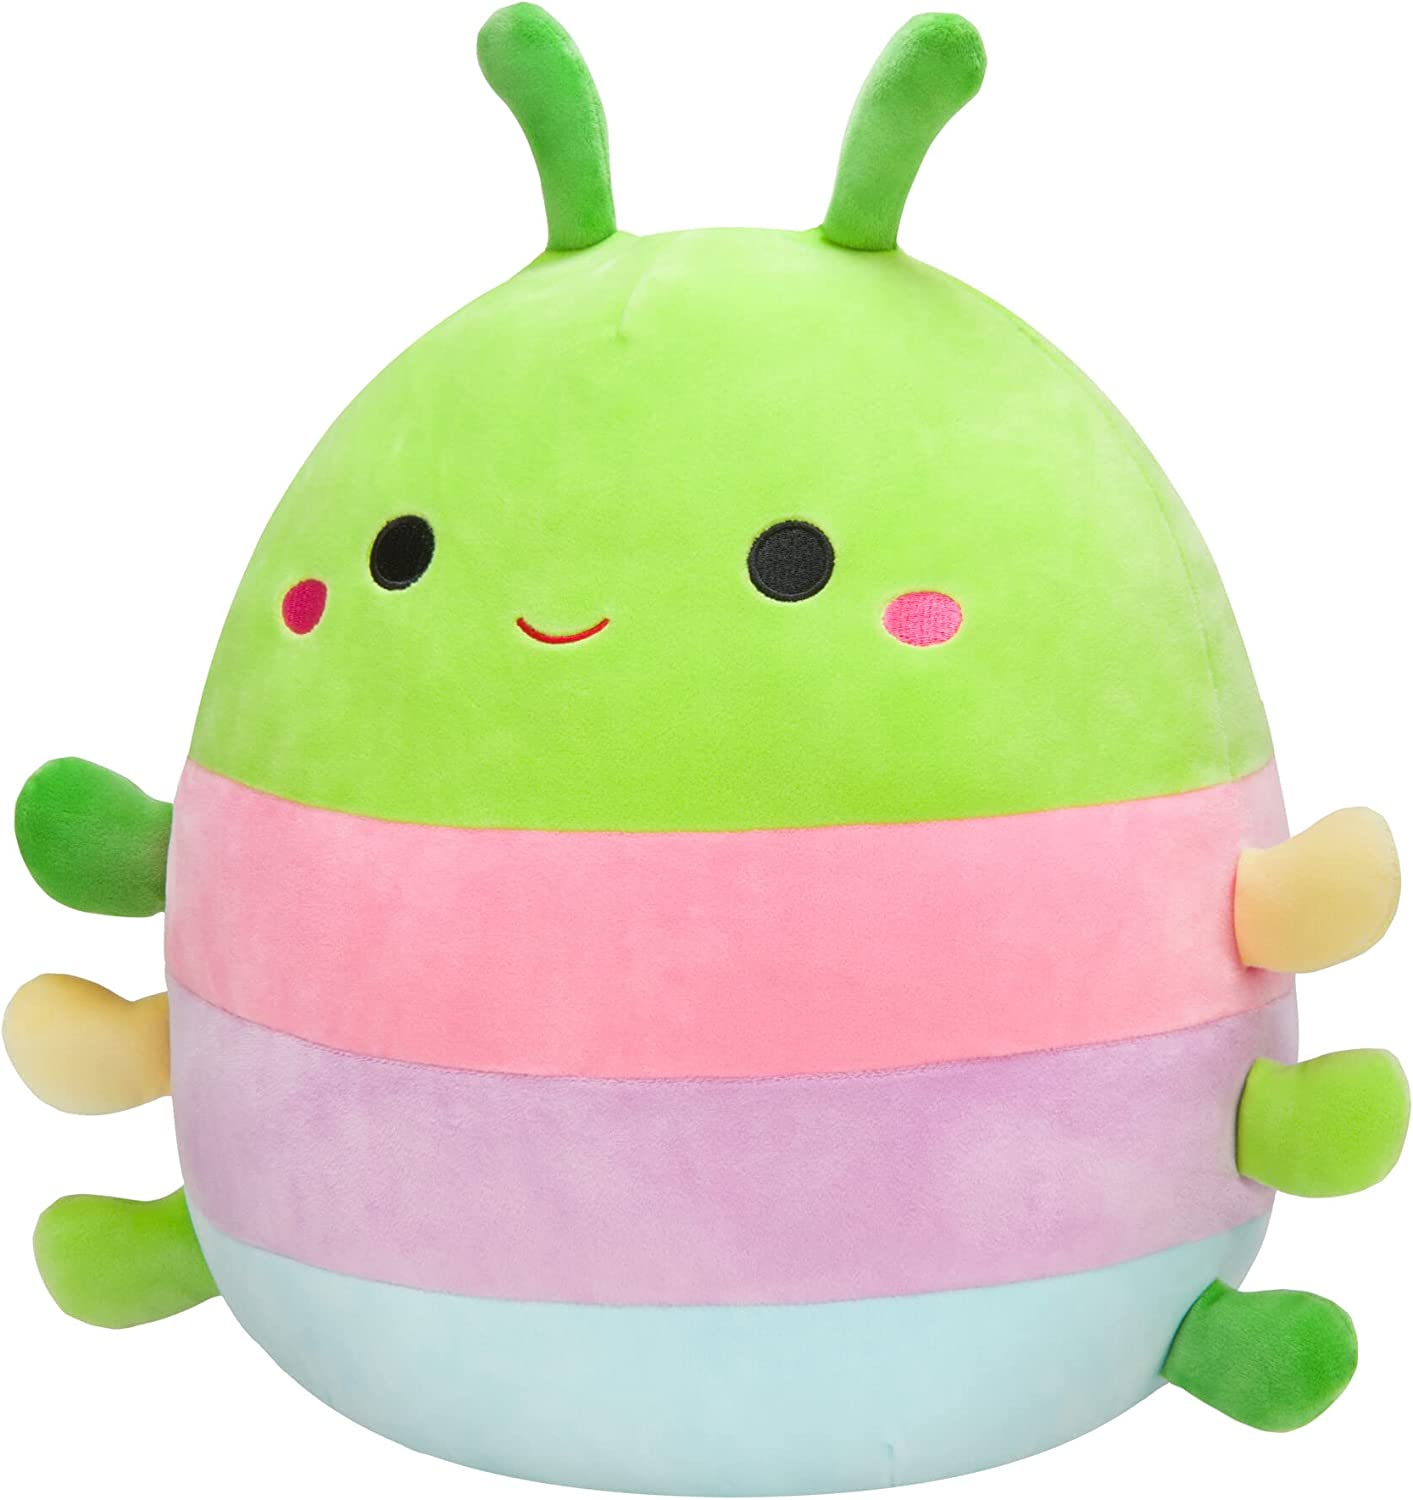 Gift Idea for Kids: An Adorable Green Squishmallow!